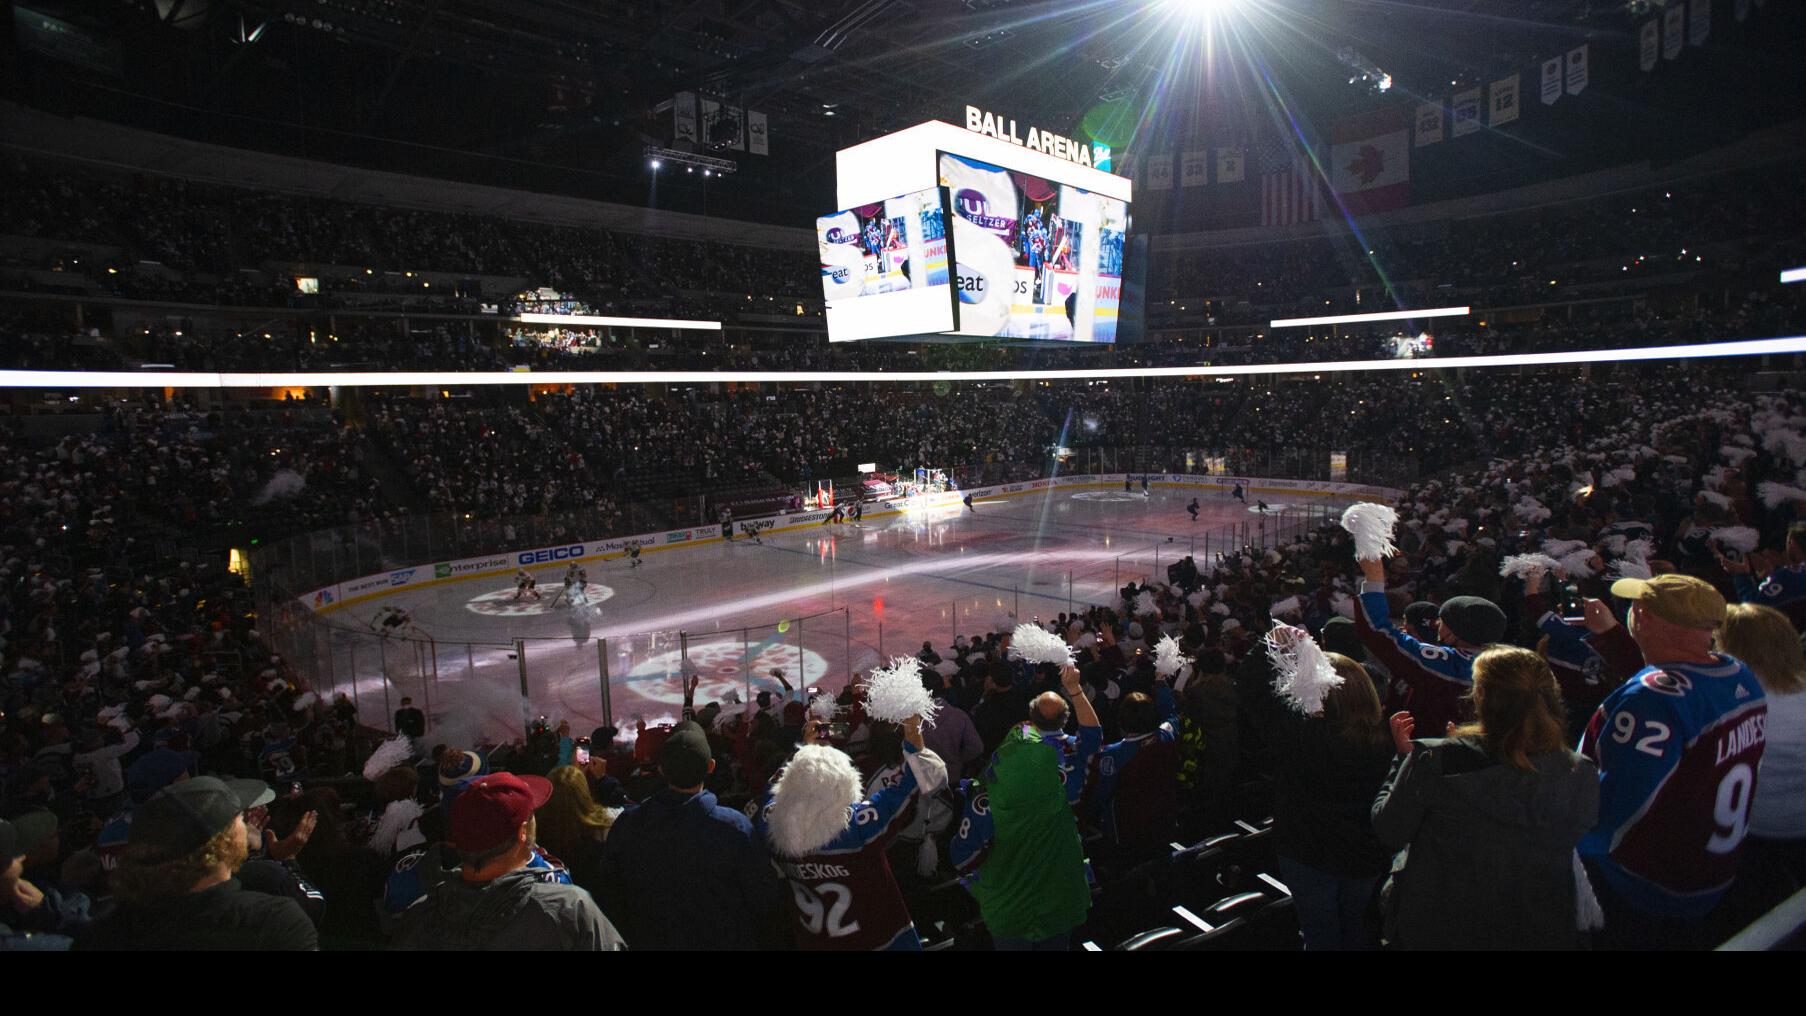 COLORADO AVALANCHE: Ball Arena watch parties for Stanley Cup Final sold out